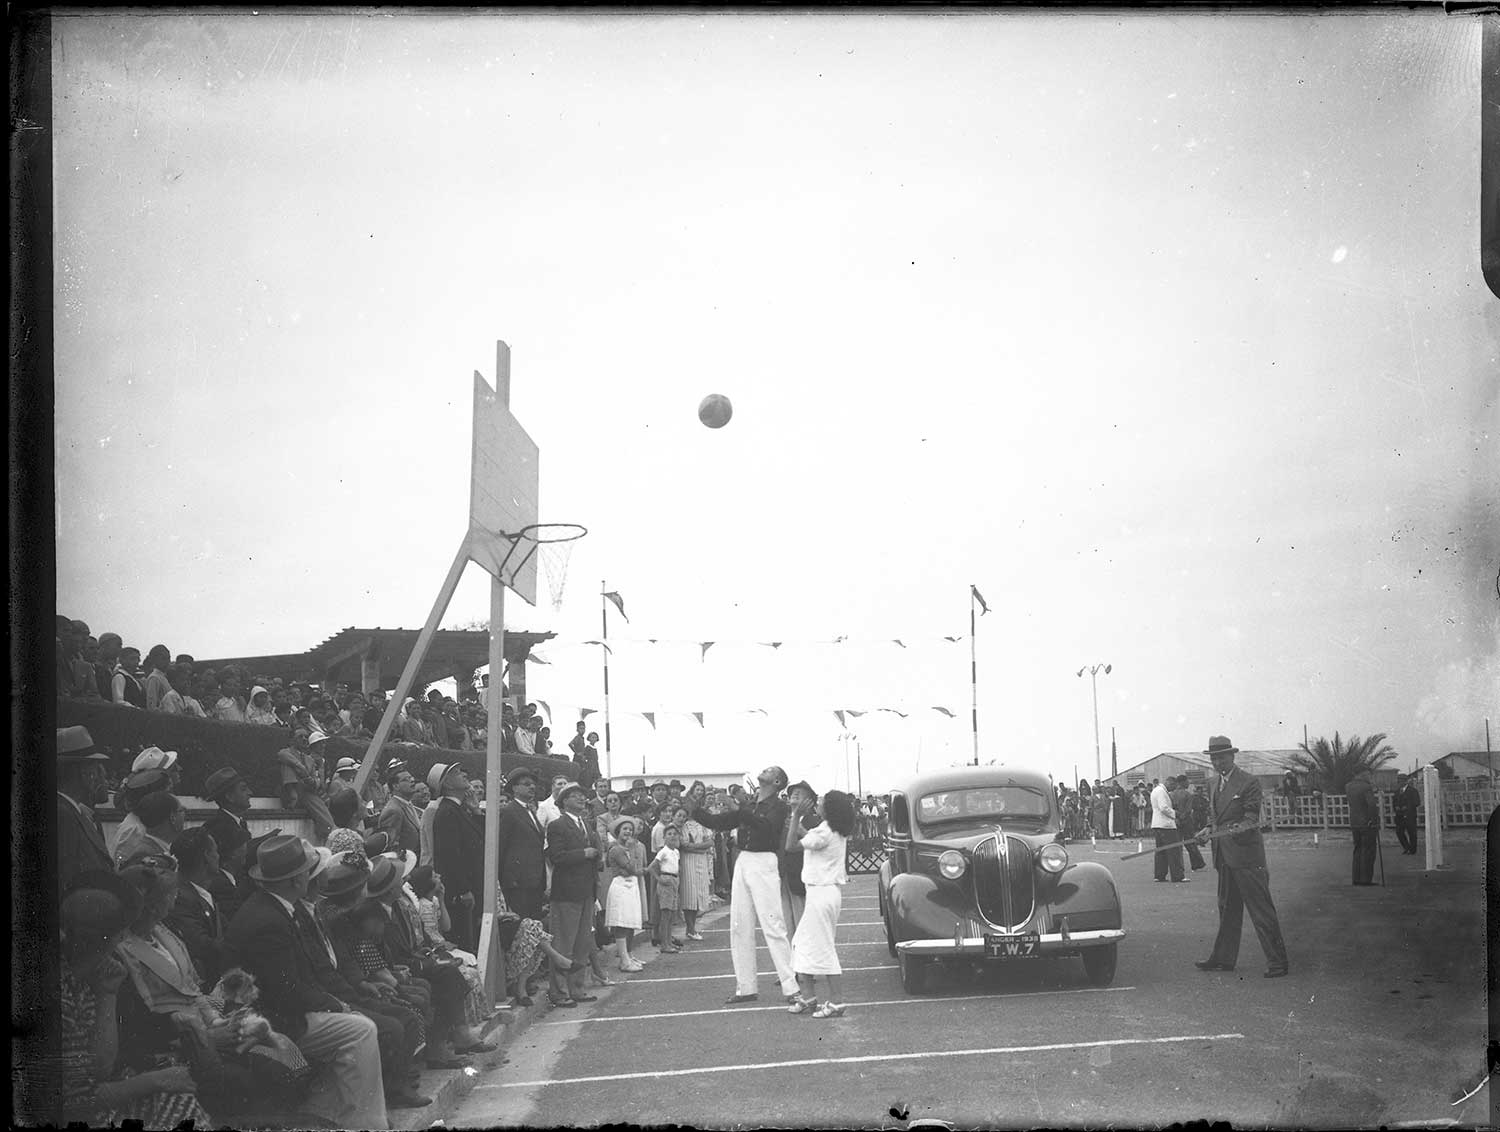 View of spectators behind a basketball net in a parking lot